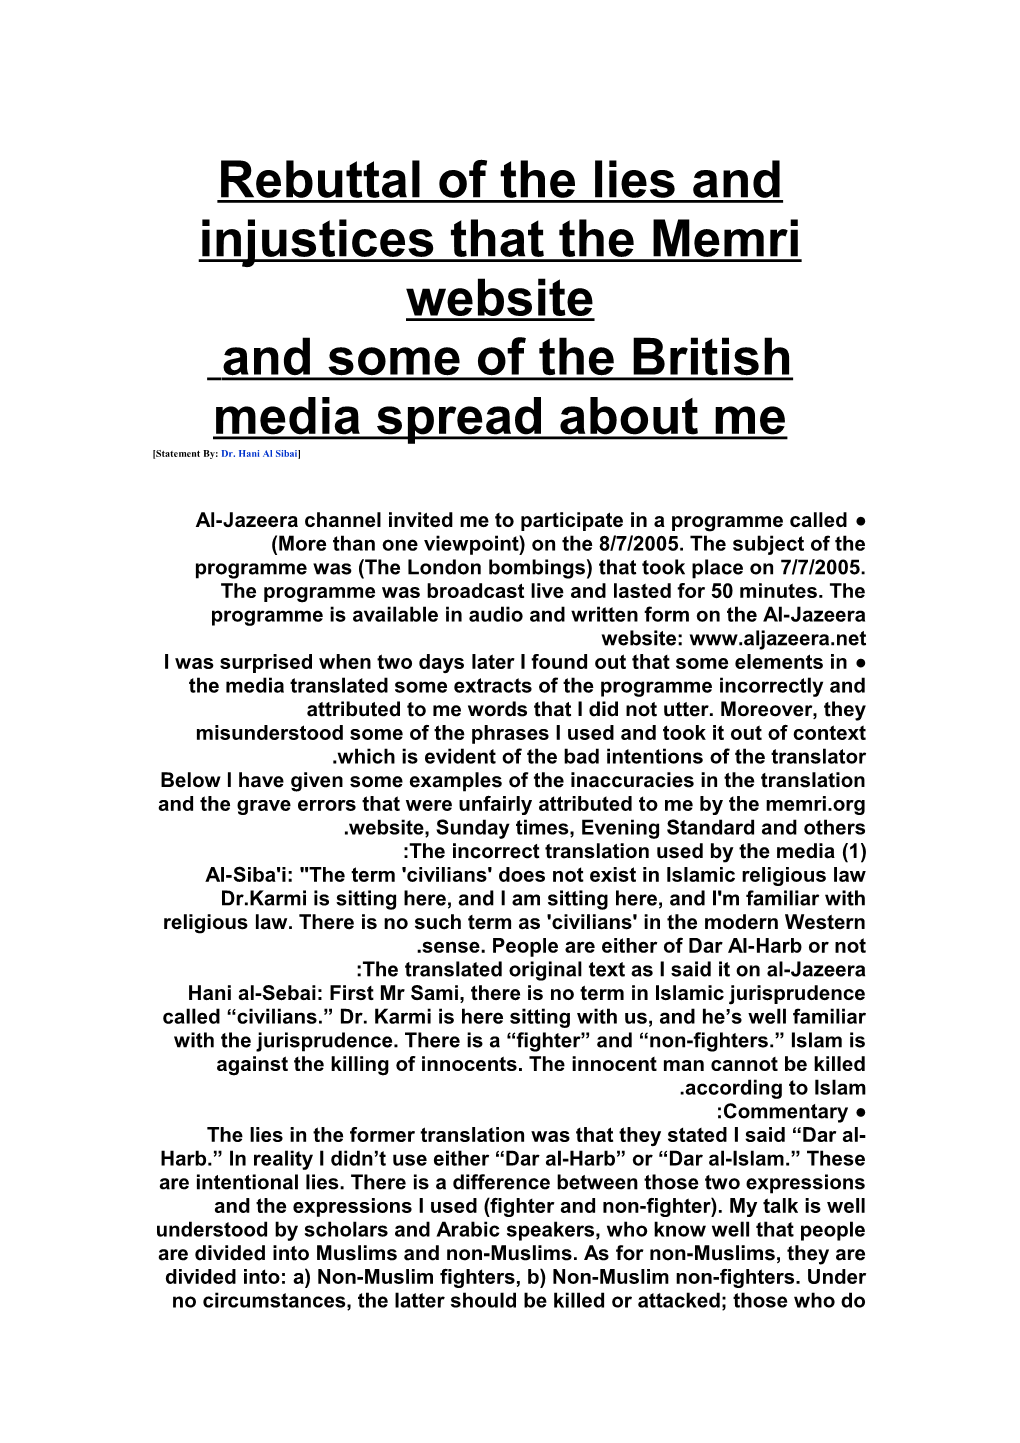 Rebuttal of the Lies and Injustices That the Memri Website